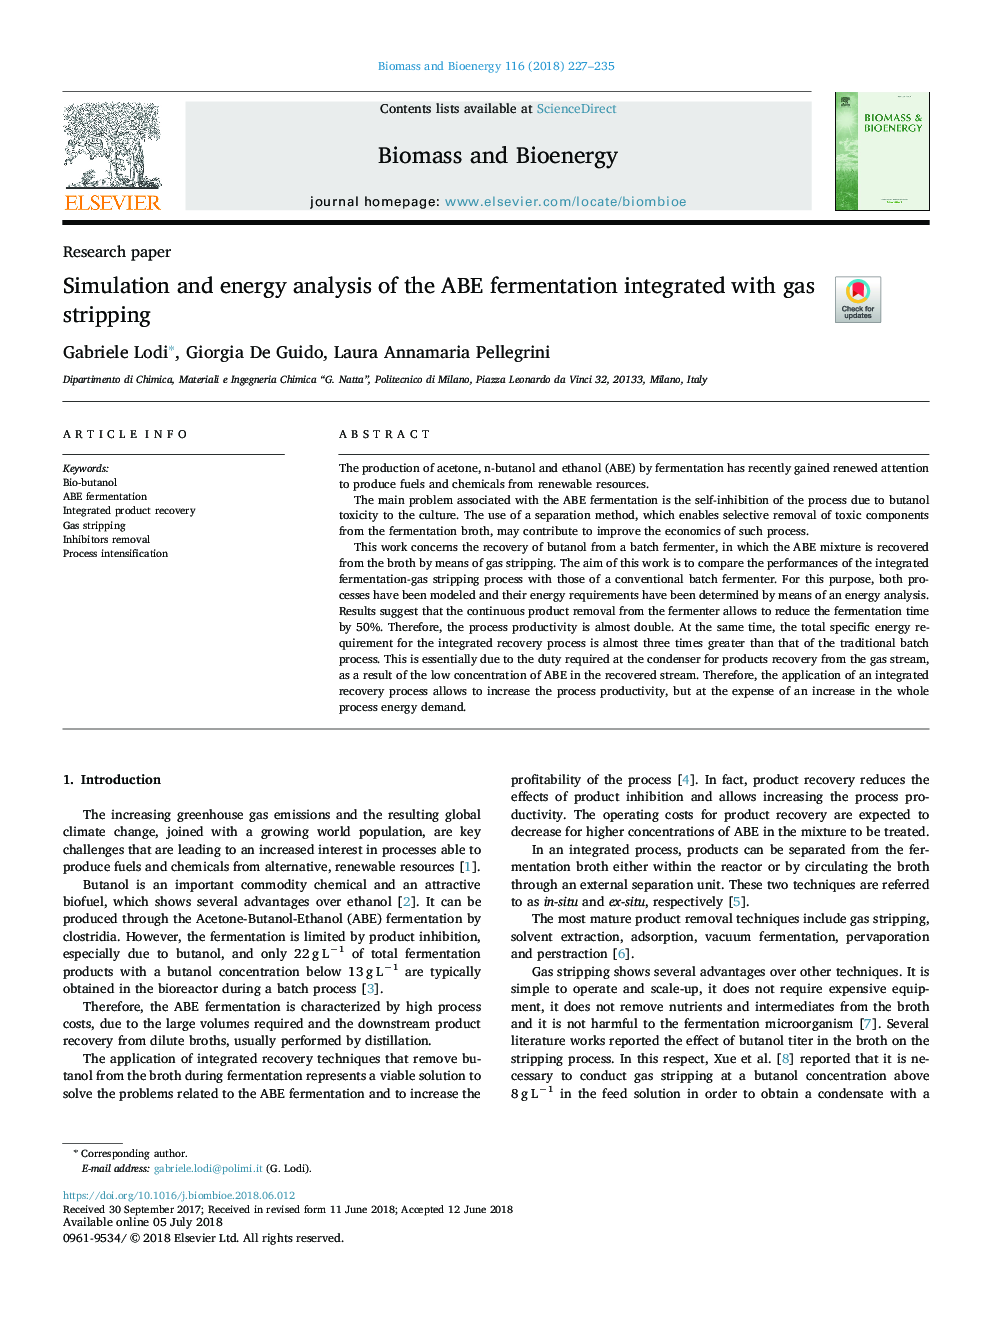 Simulation and energy analysis of the ABE fermentation integrated with gas stripping